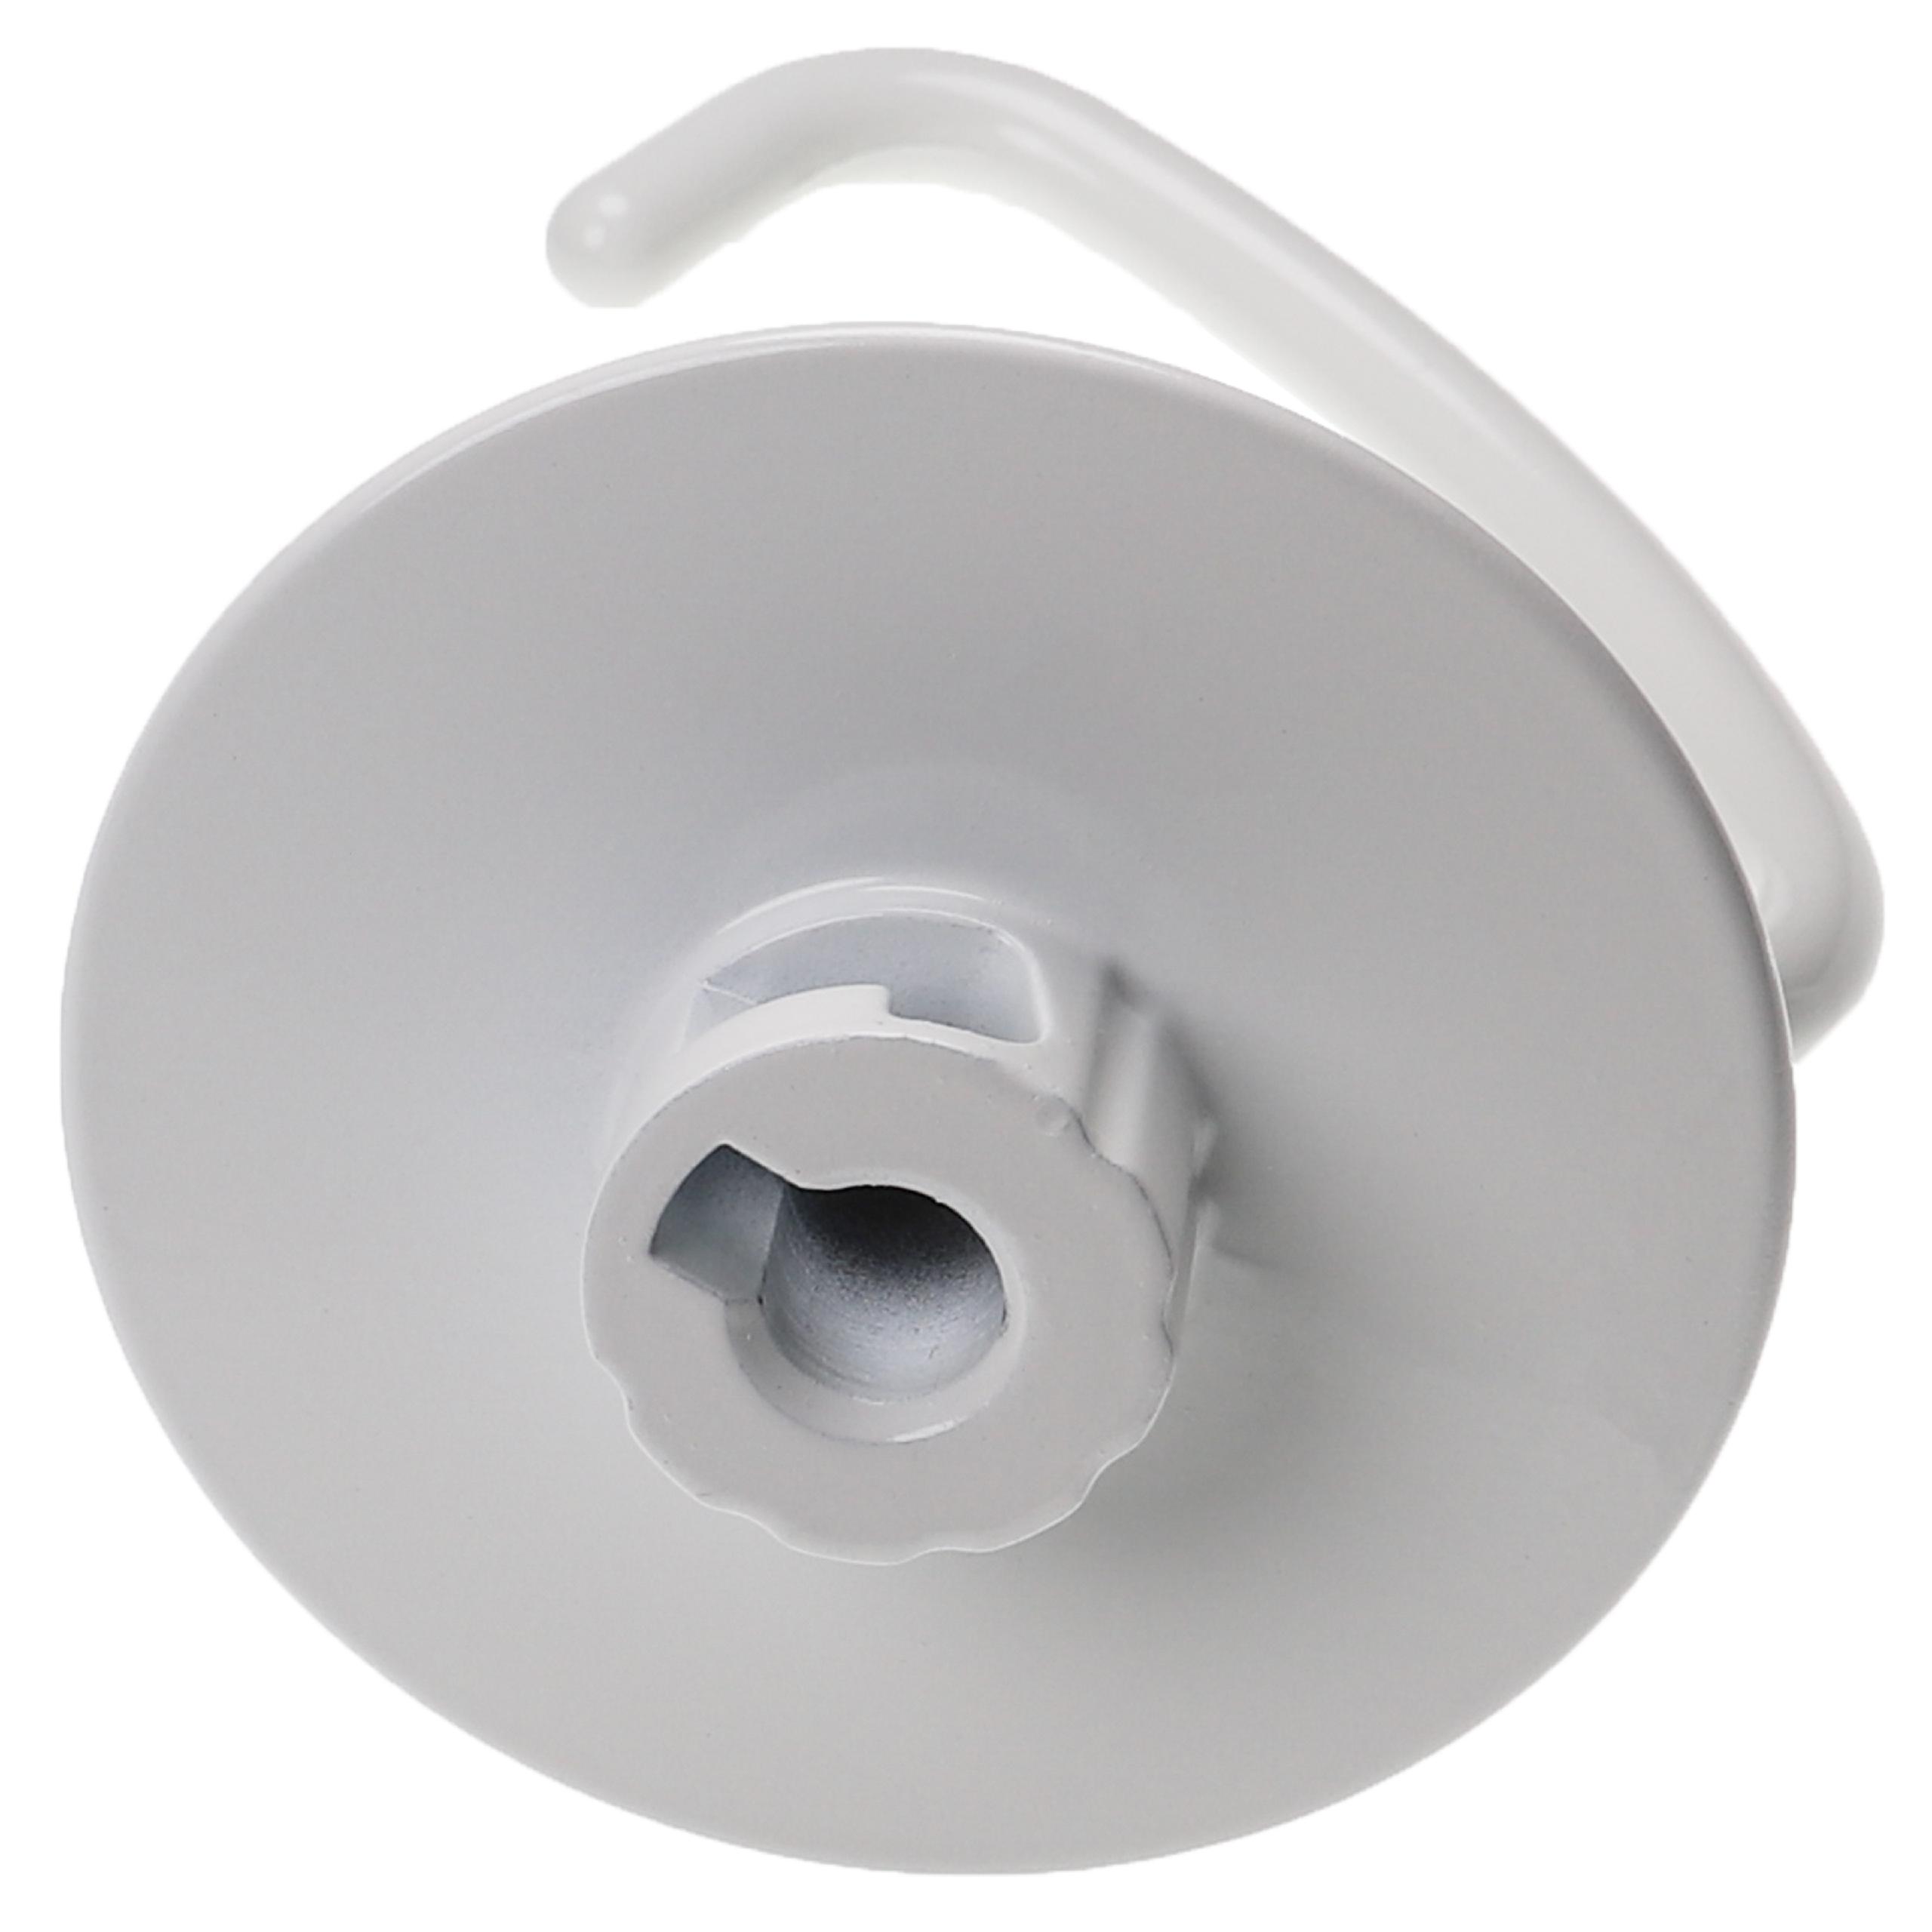 Dough Hook Replacement for Indesit-Company C00510811 for Kitchen Machine - Mixing Paddle, white